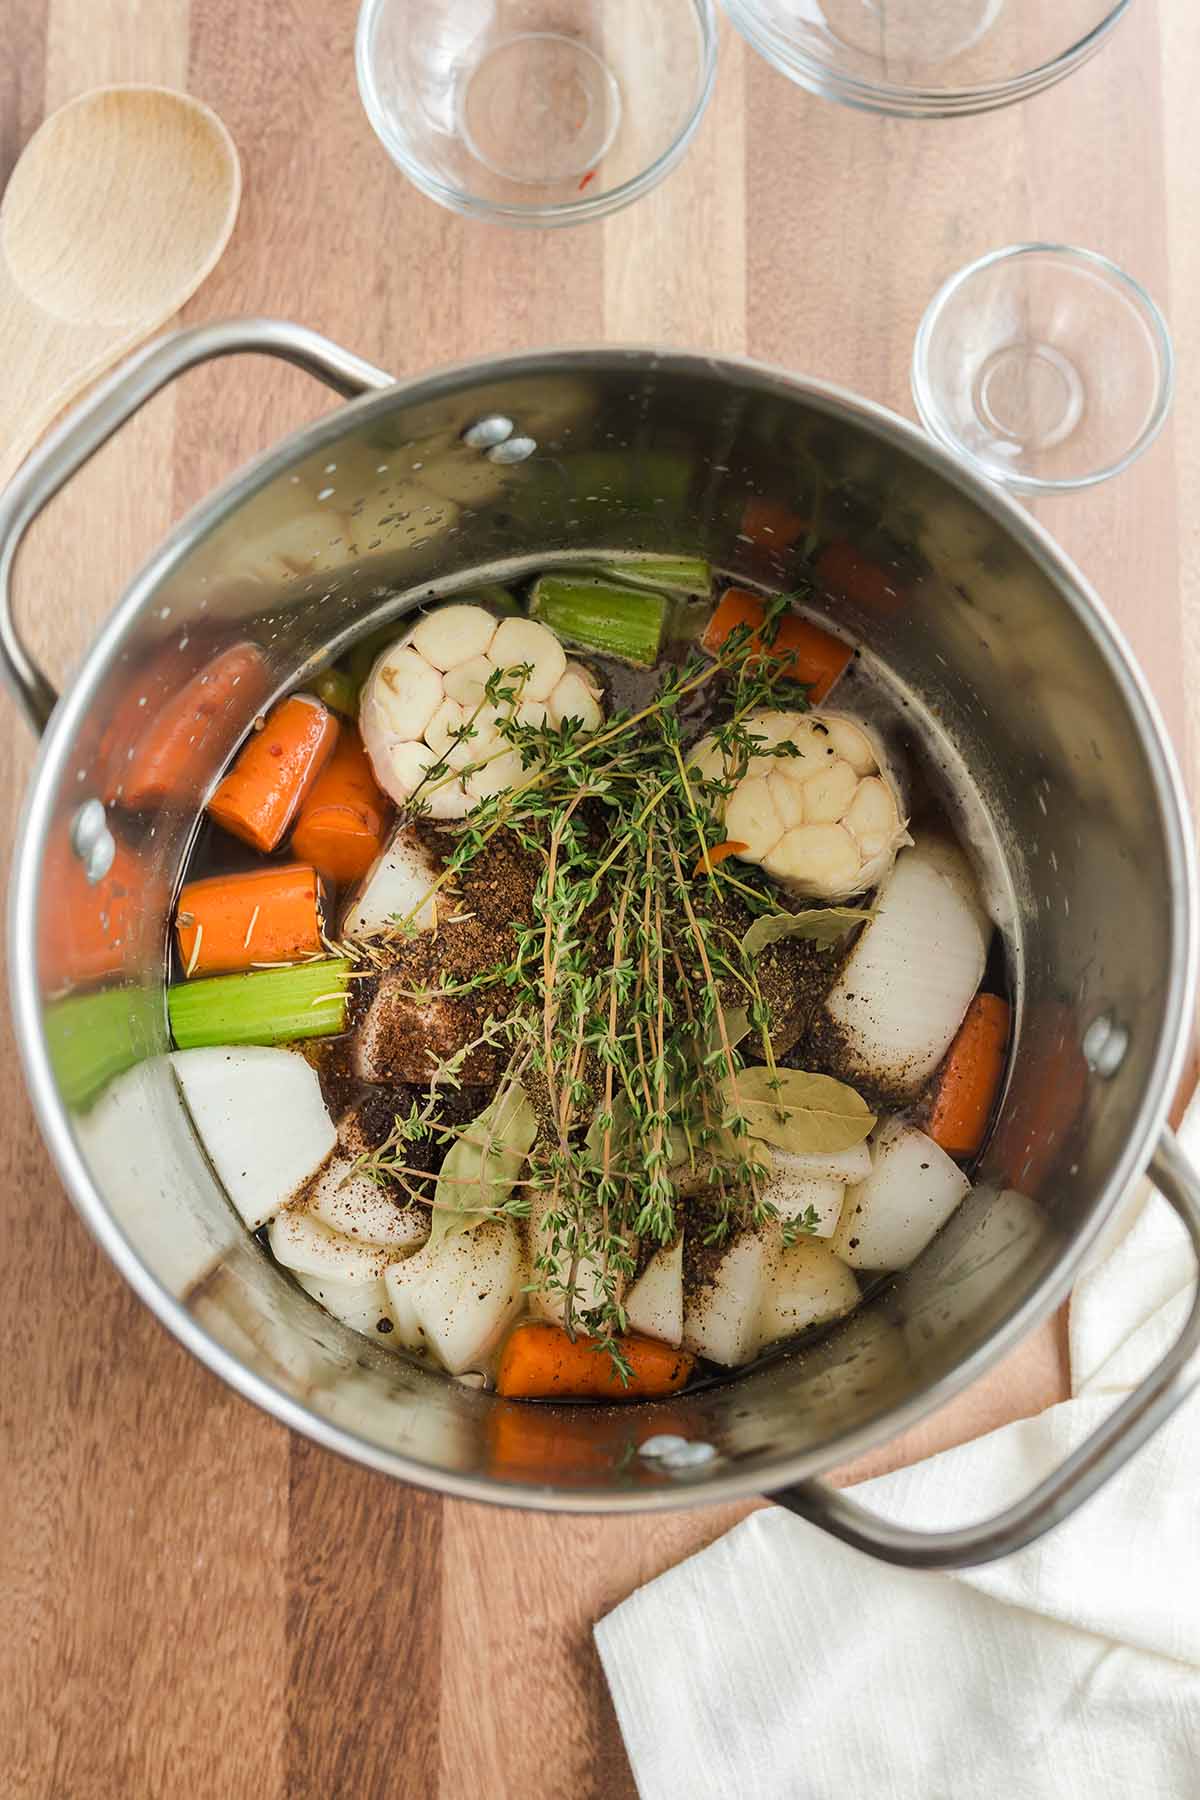 Chopped vegetables and water in a stock pot.